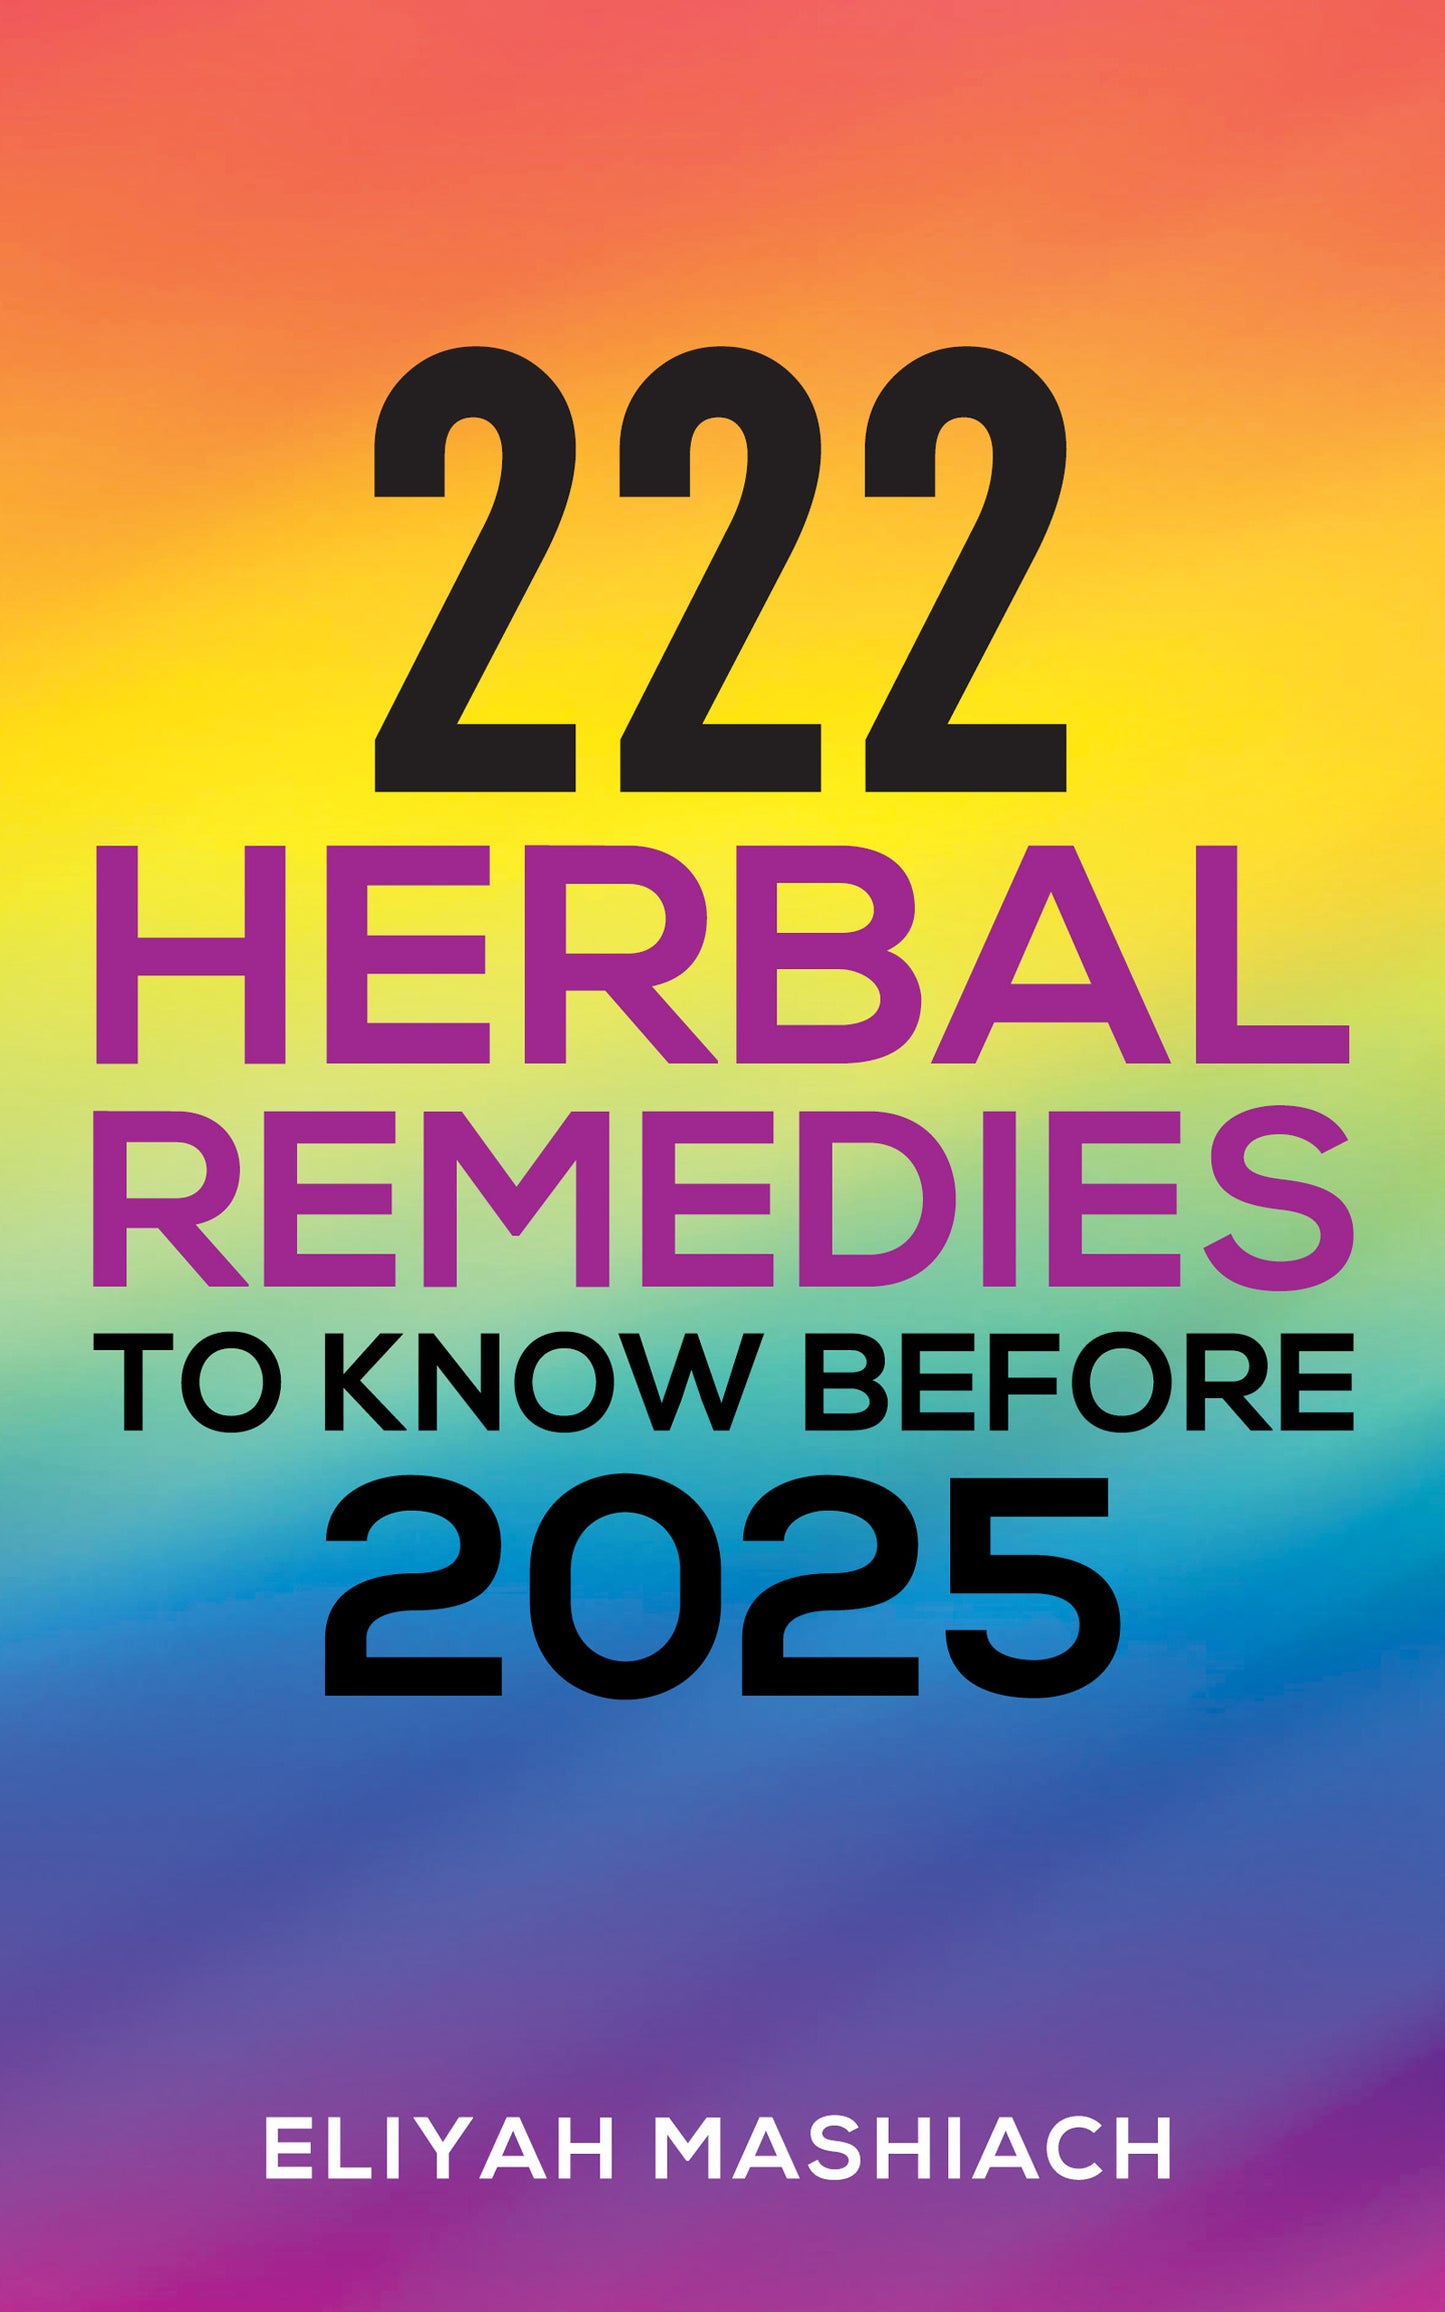 222 HERBAL REMEDIES TO KNOW BEFORE 2025   FOR 22 EVERYDAY ILLNESSES